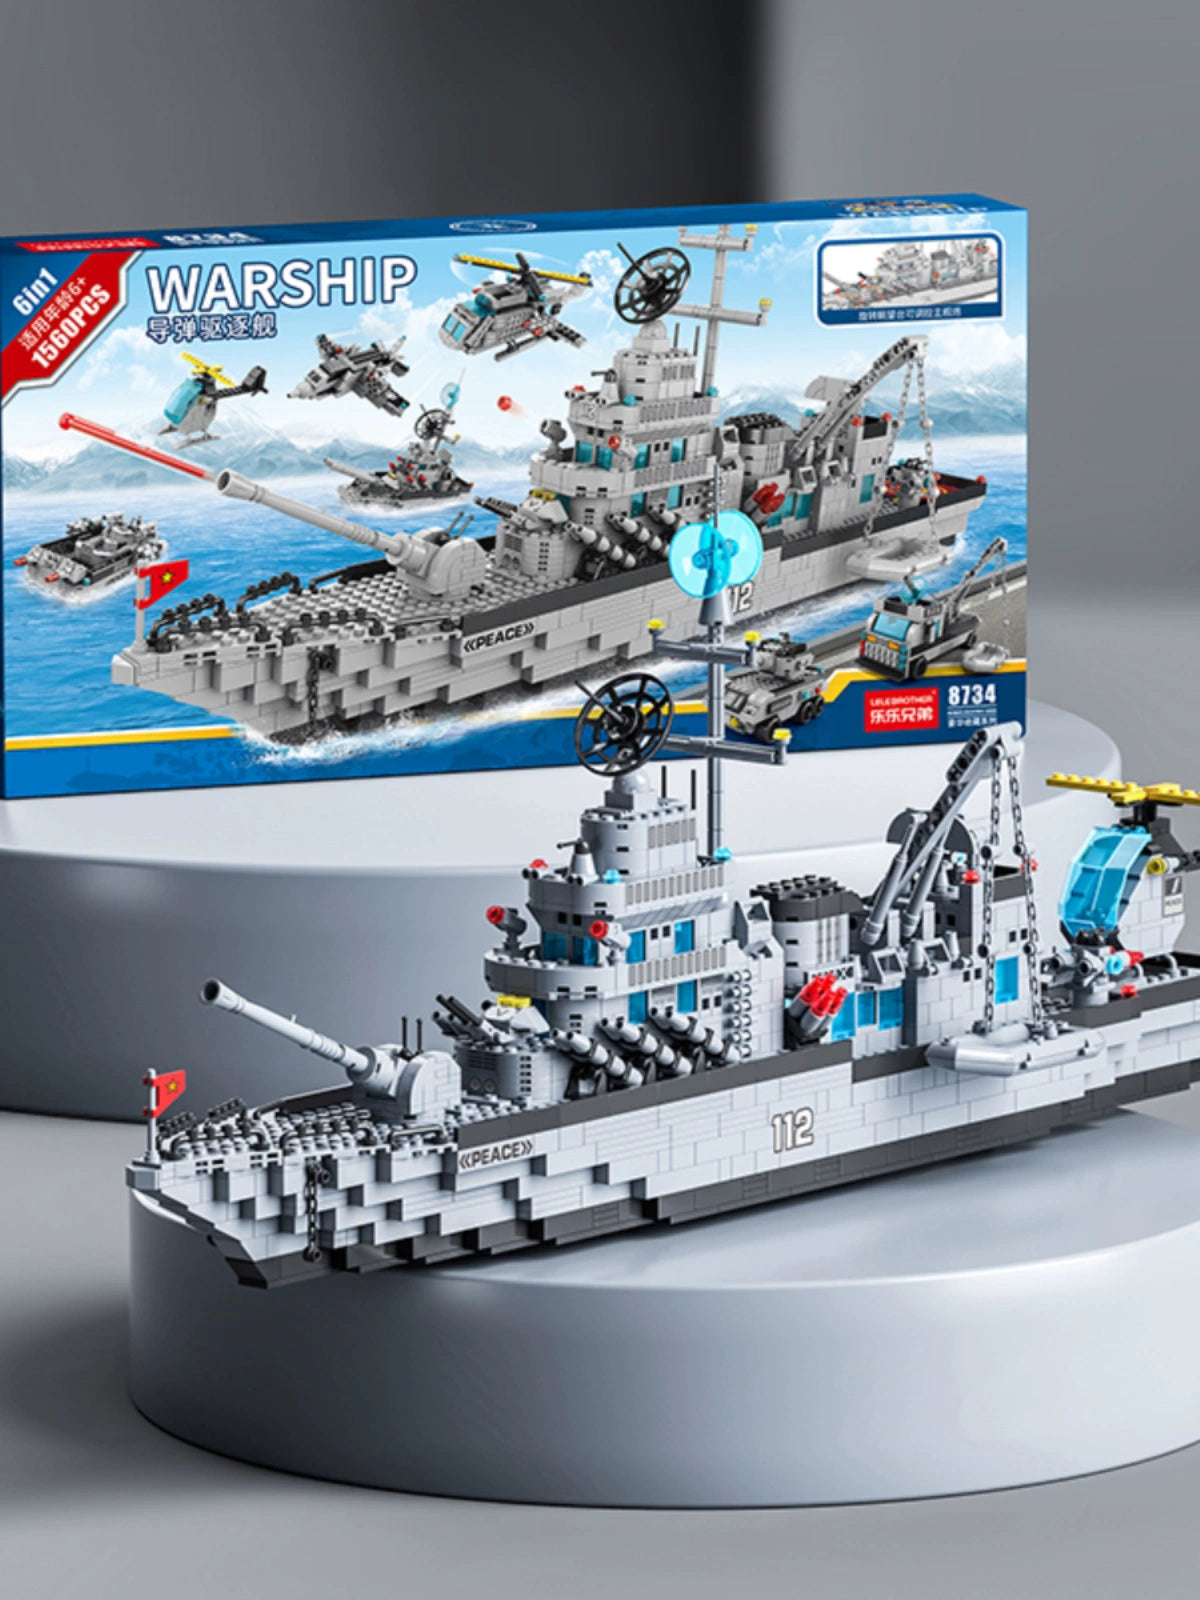 LELE Brothers Naval Brick Models - Diverse Range from Aircraft Carriers to Battleships